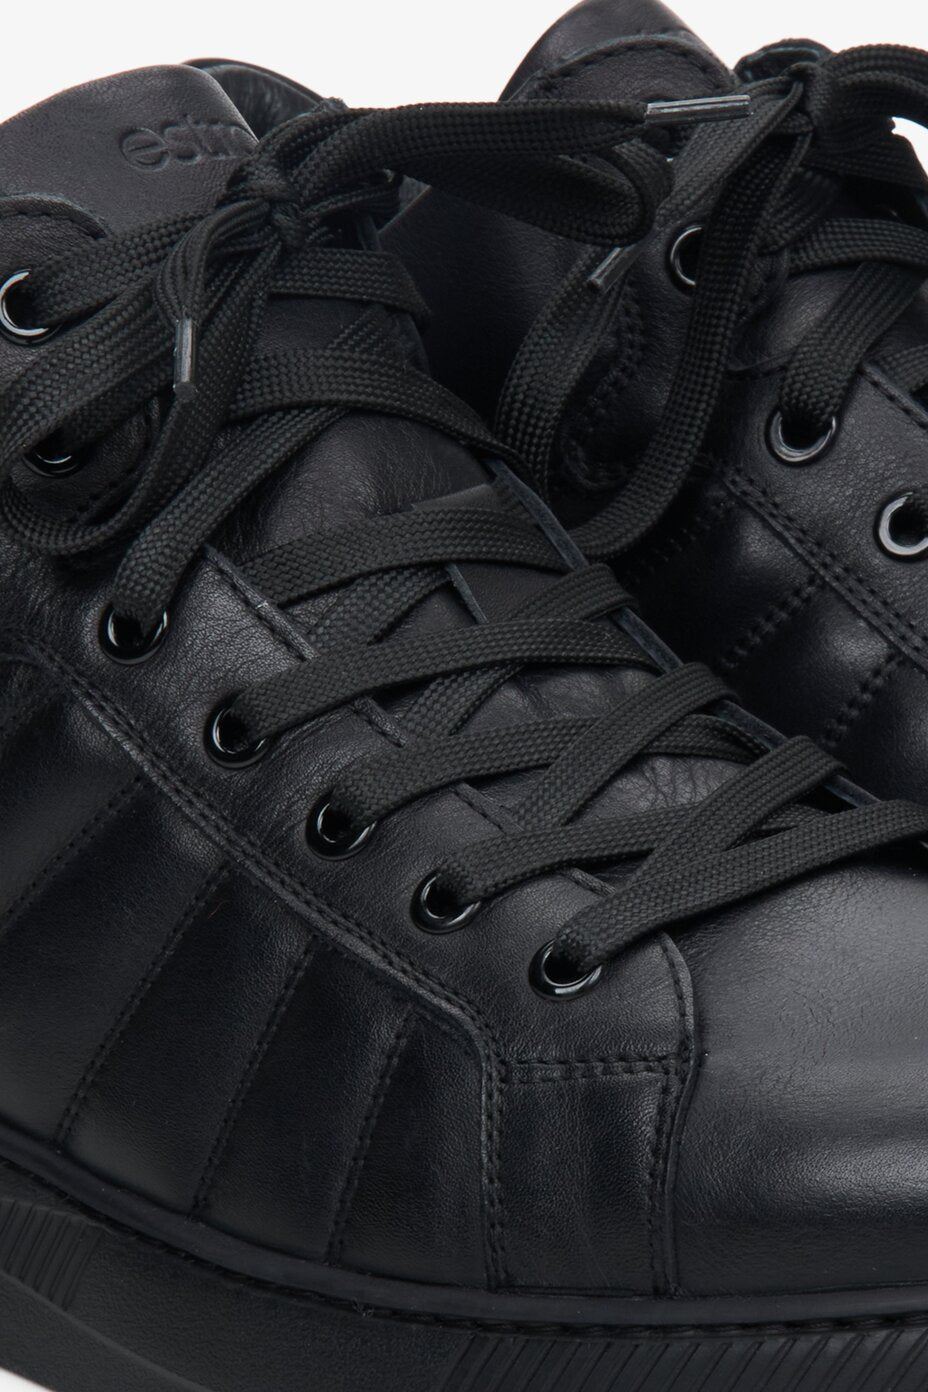 Men's fall leather sneakers in black - close-up of the lacing system.